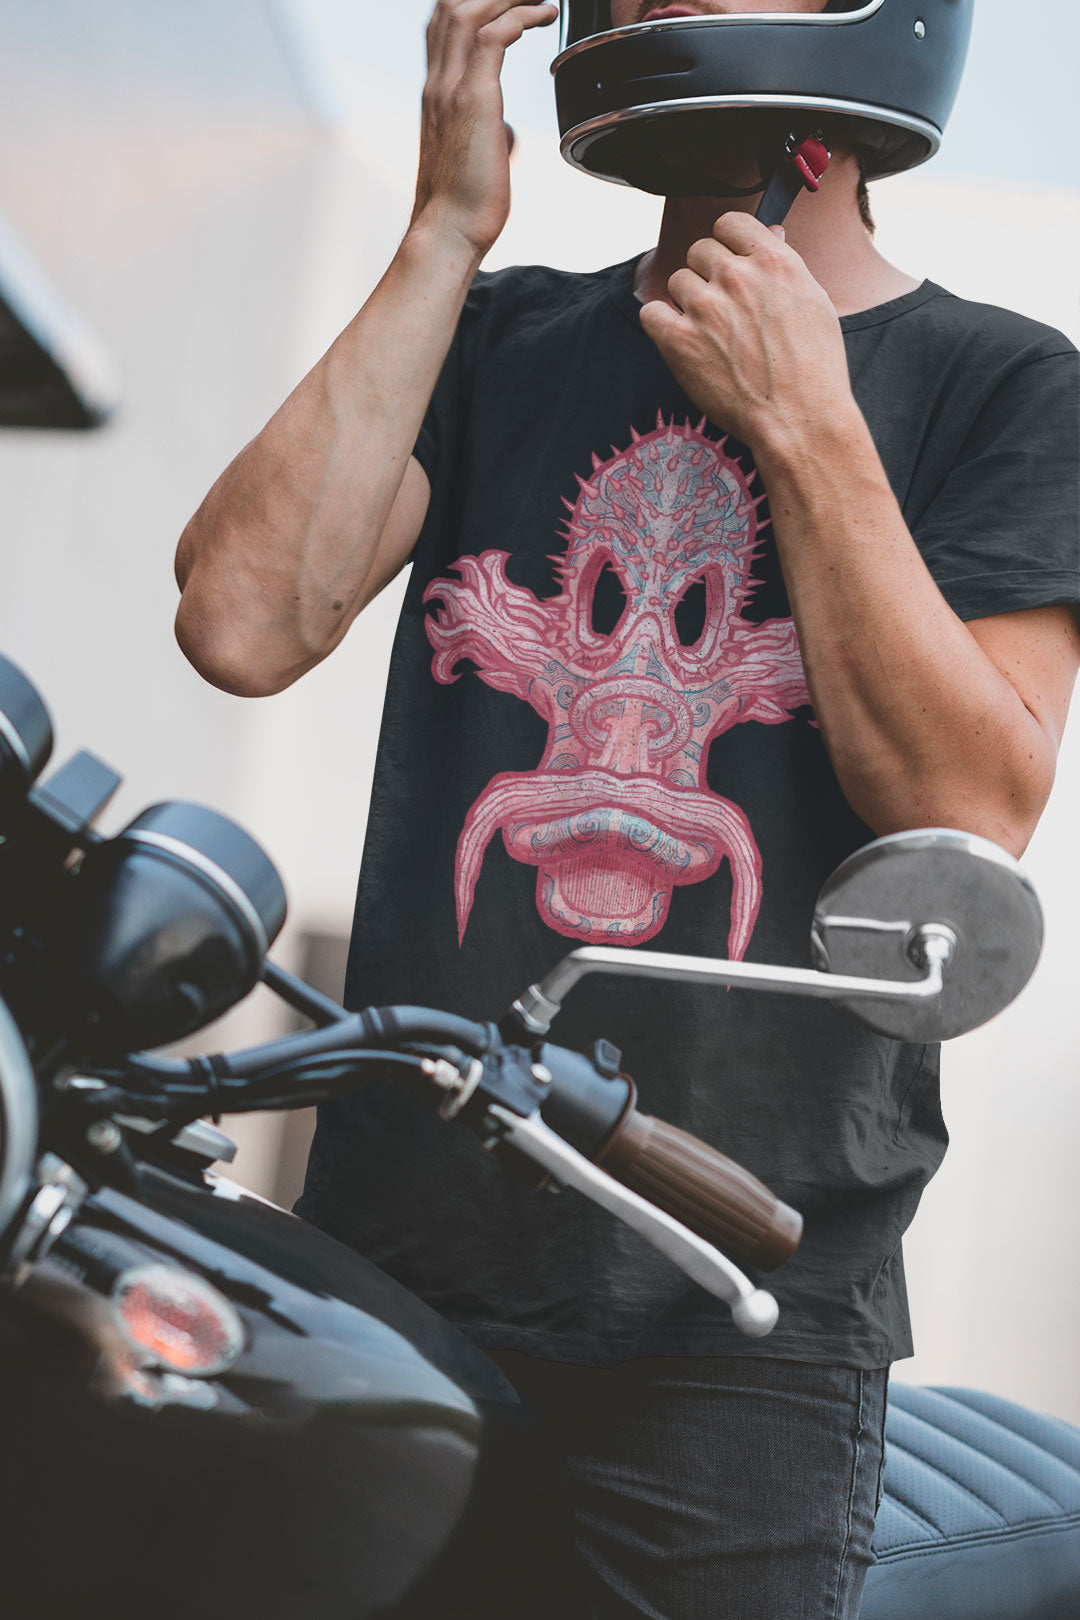 Red Motorcycle Skull No 013 t-shirt is everything you've dreamed of and more. It feels soft and lightweight, with the right amount of stretch. It's comfortable and flattering for all.